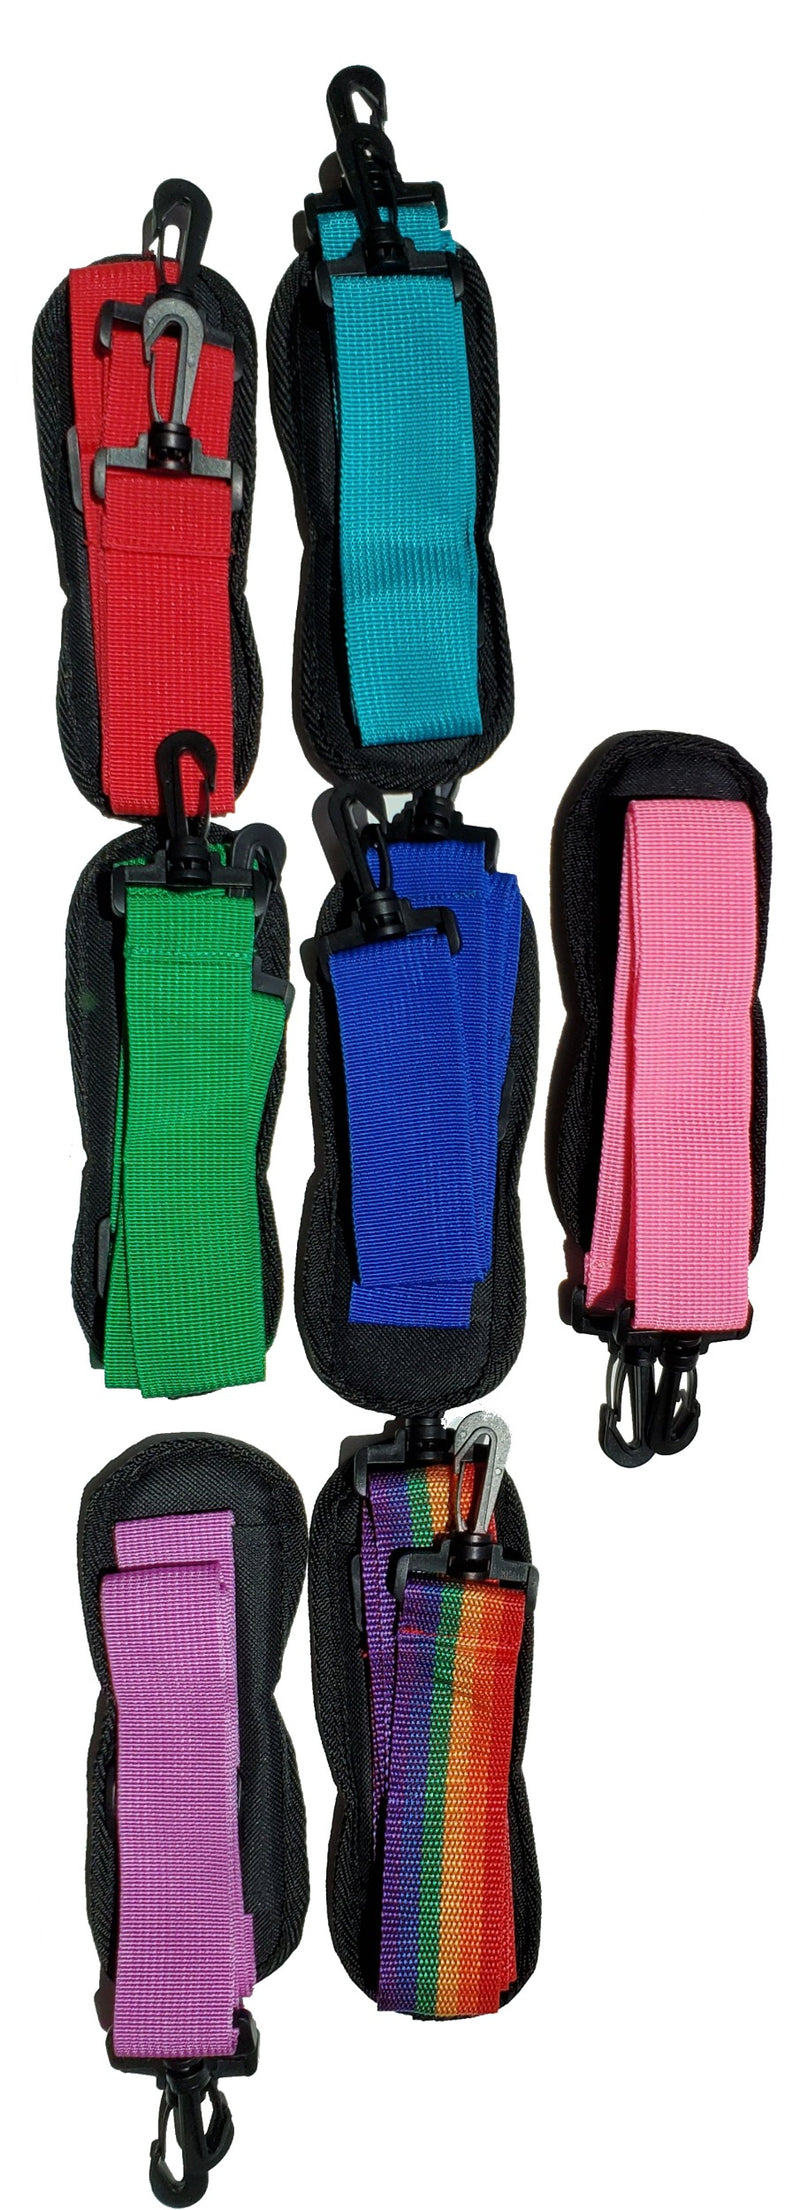 New Redesigned PinFolio Stick'N'Go Front Boards